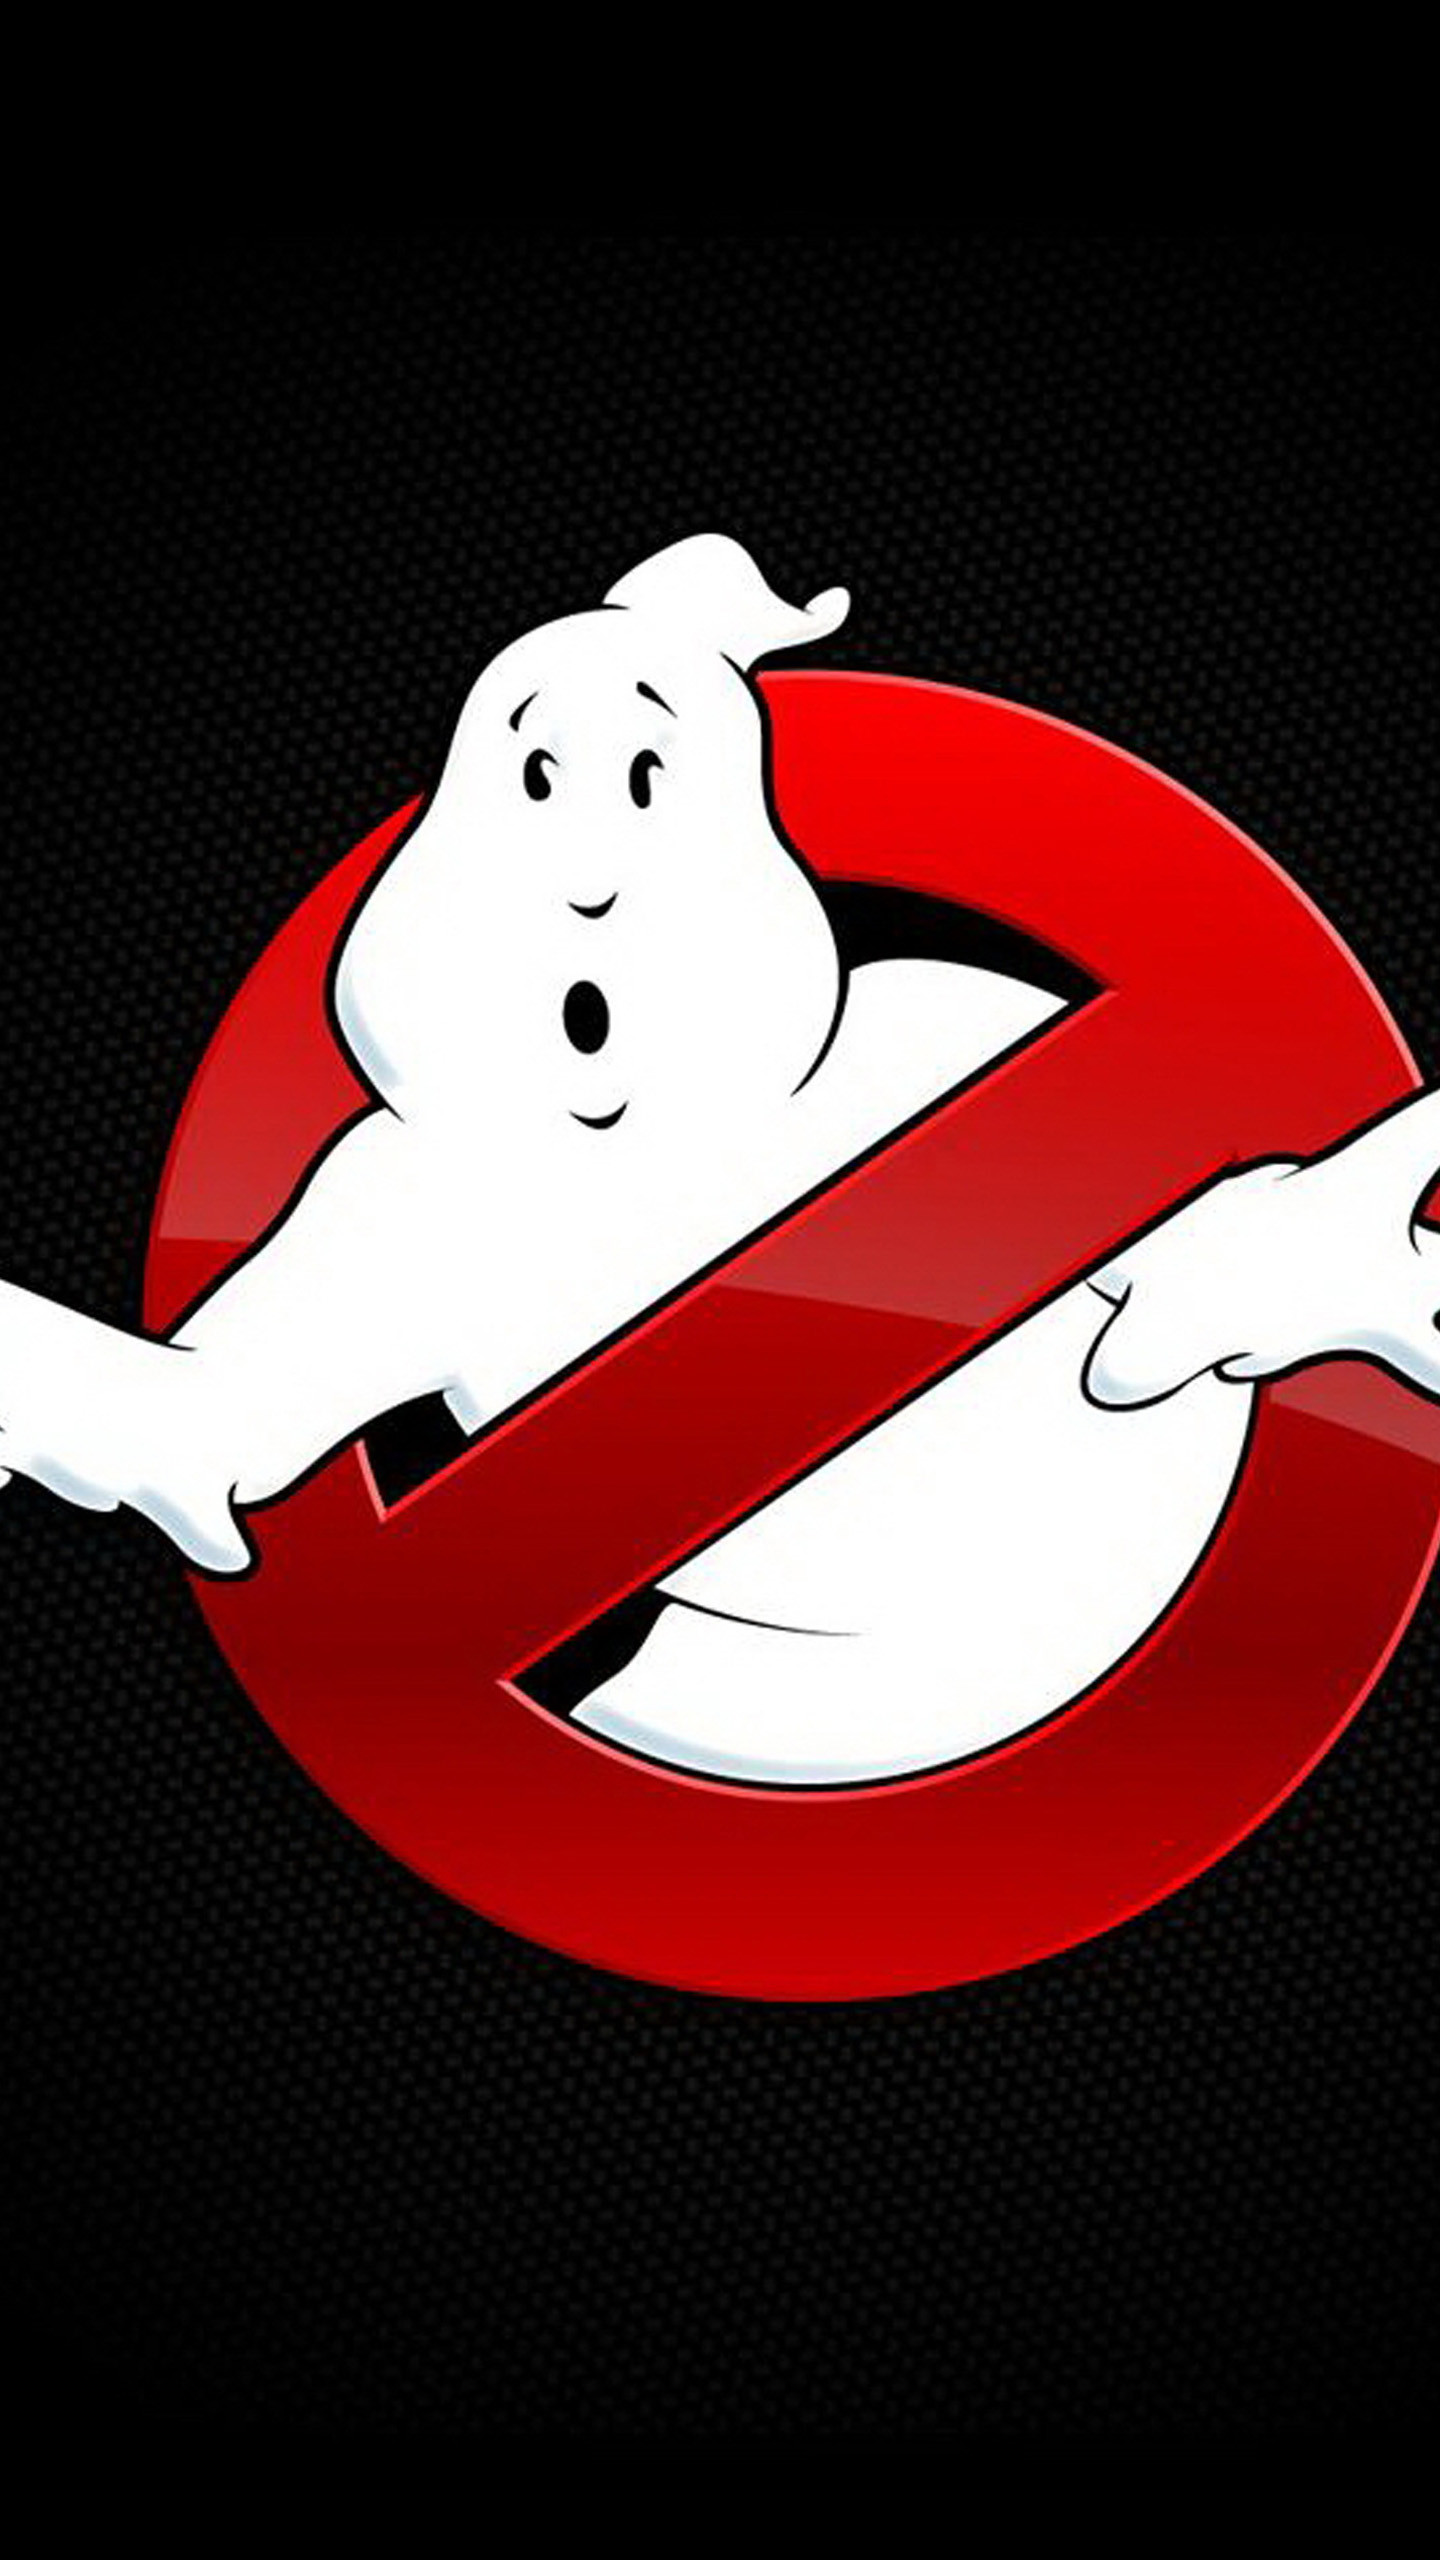 1440x2560 Ghost Busters LG G3 Wallpapers